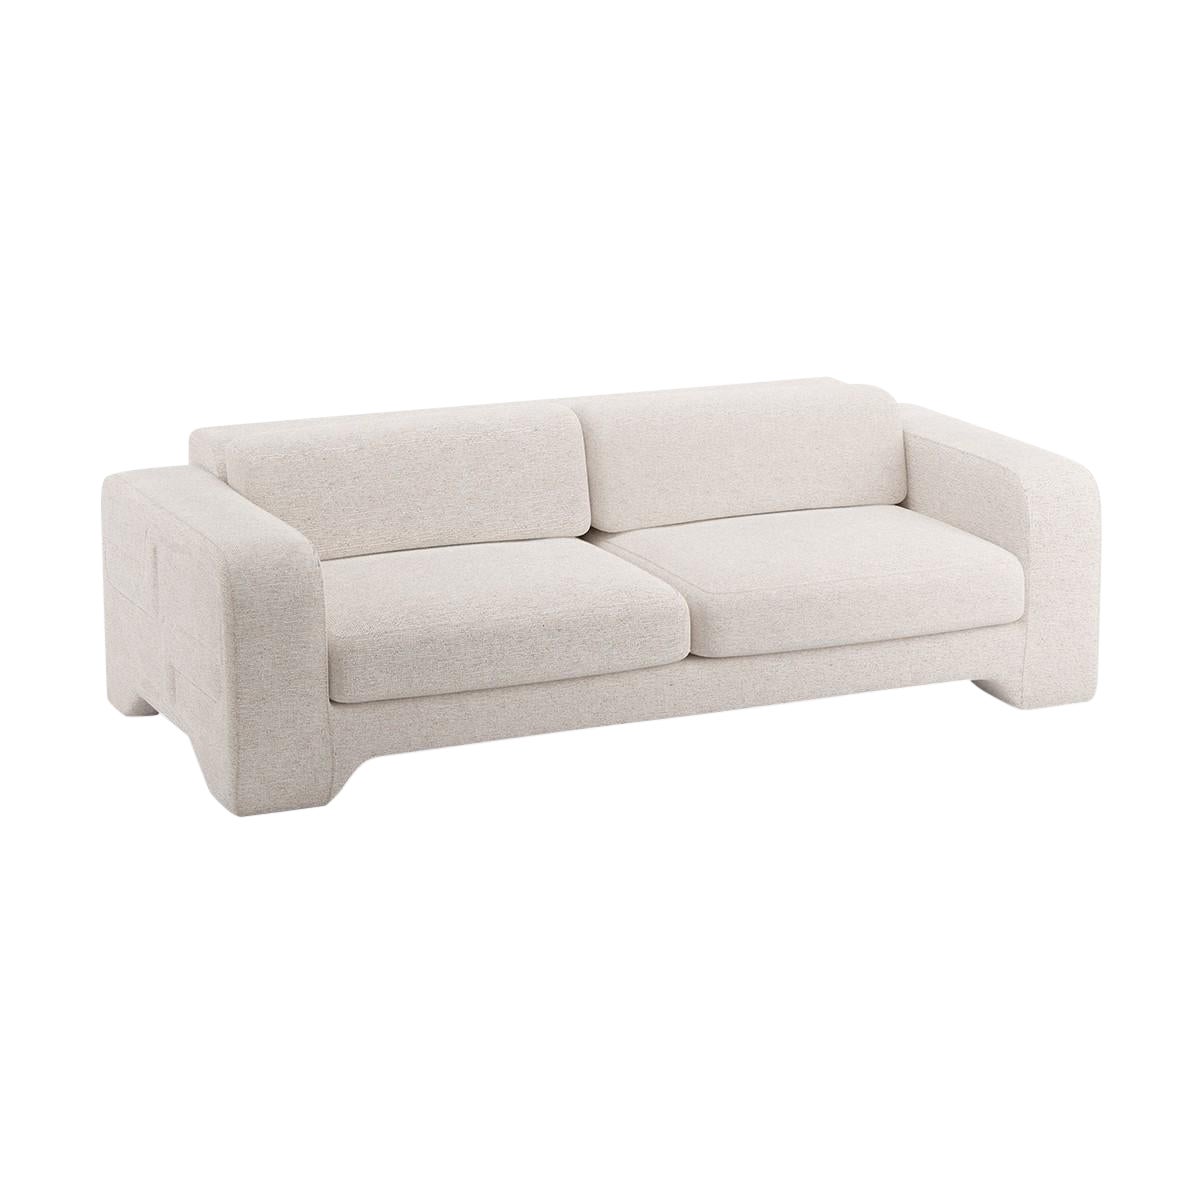 Popus Editions Giovanna 2.5 Seater Sofa in Otter Megeve Fabric with Knit Effect